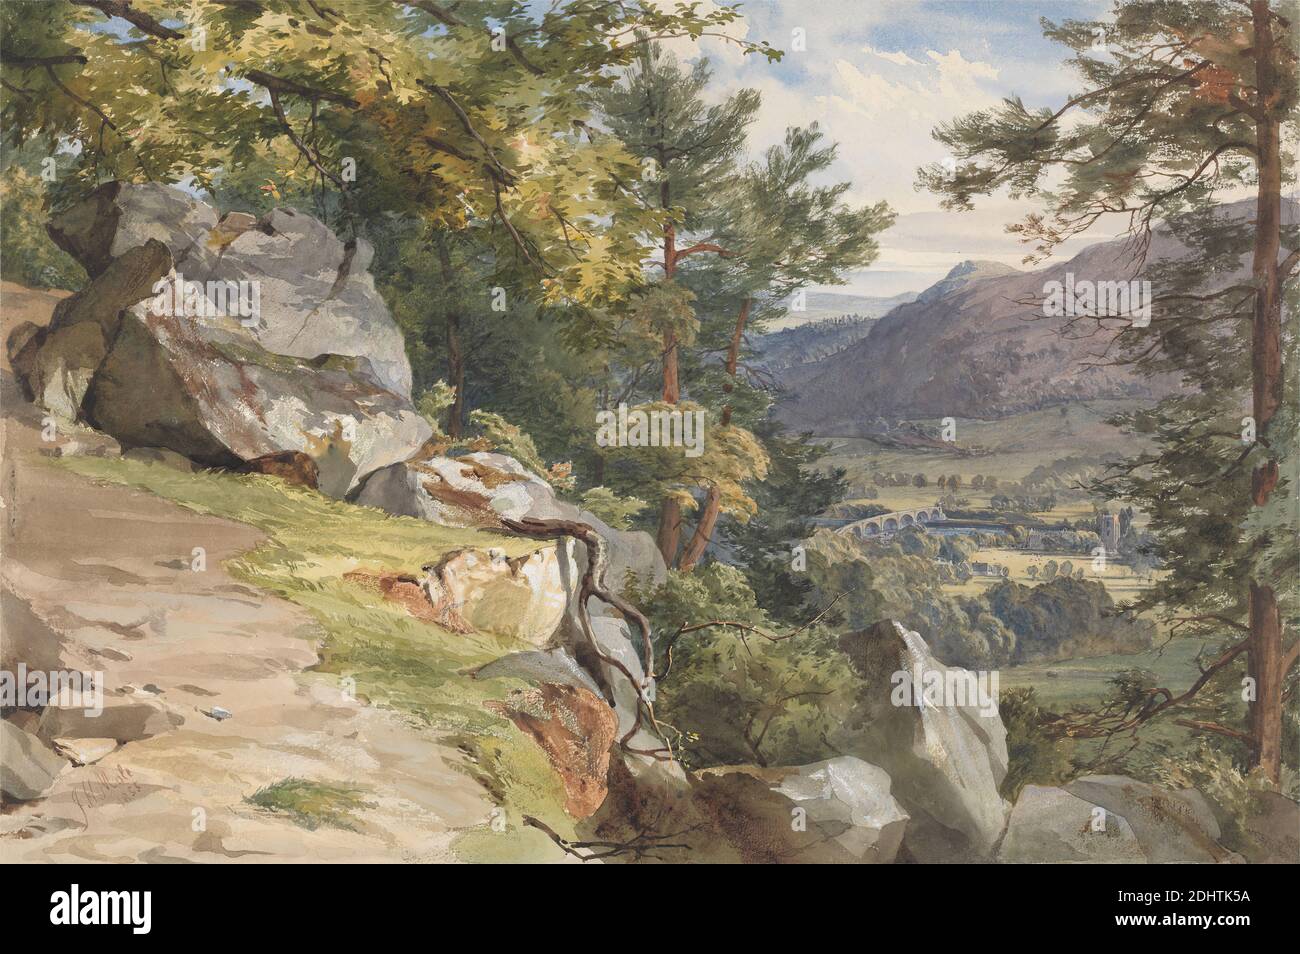 View from Craig-y-Barns, Dunkeld, Looking South, John Henry Mole, 1814–1886, British, 1855, Watercolor and white gouache over graphite on thick, slightly textured, cream wove paper, Sheet: 14 1/16 x 21 1/8 inches (35.7 x 53.7 cm), birch trees, bridge (built work), city, cliffs, clouds, grass, landscape, mountains, path, pine trees, rocks (landforms), roots, sunlight, trees, trunks, valley, Craig-y-barns, Dunkeld, Perth and Kinross, Scotland, United Kingdom Stock Photo